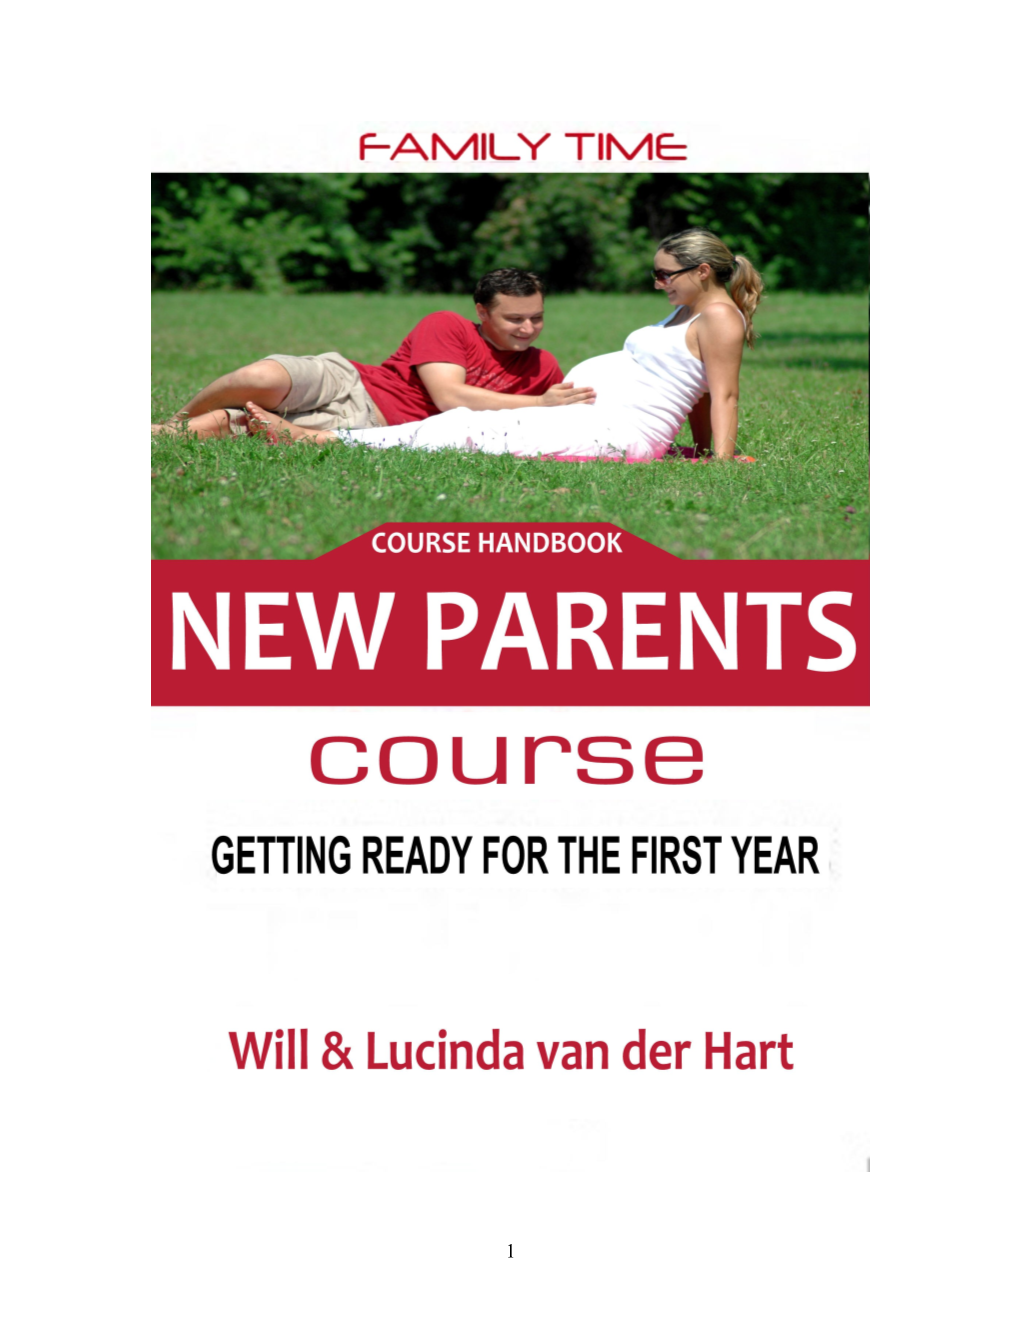 1How to Run a Family Time: New Parents Course